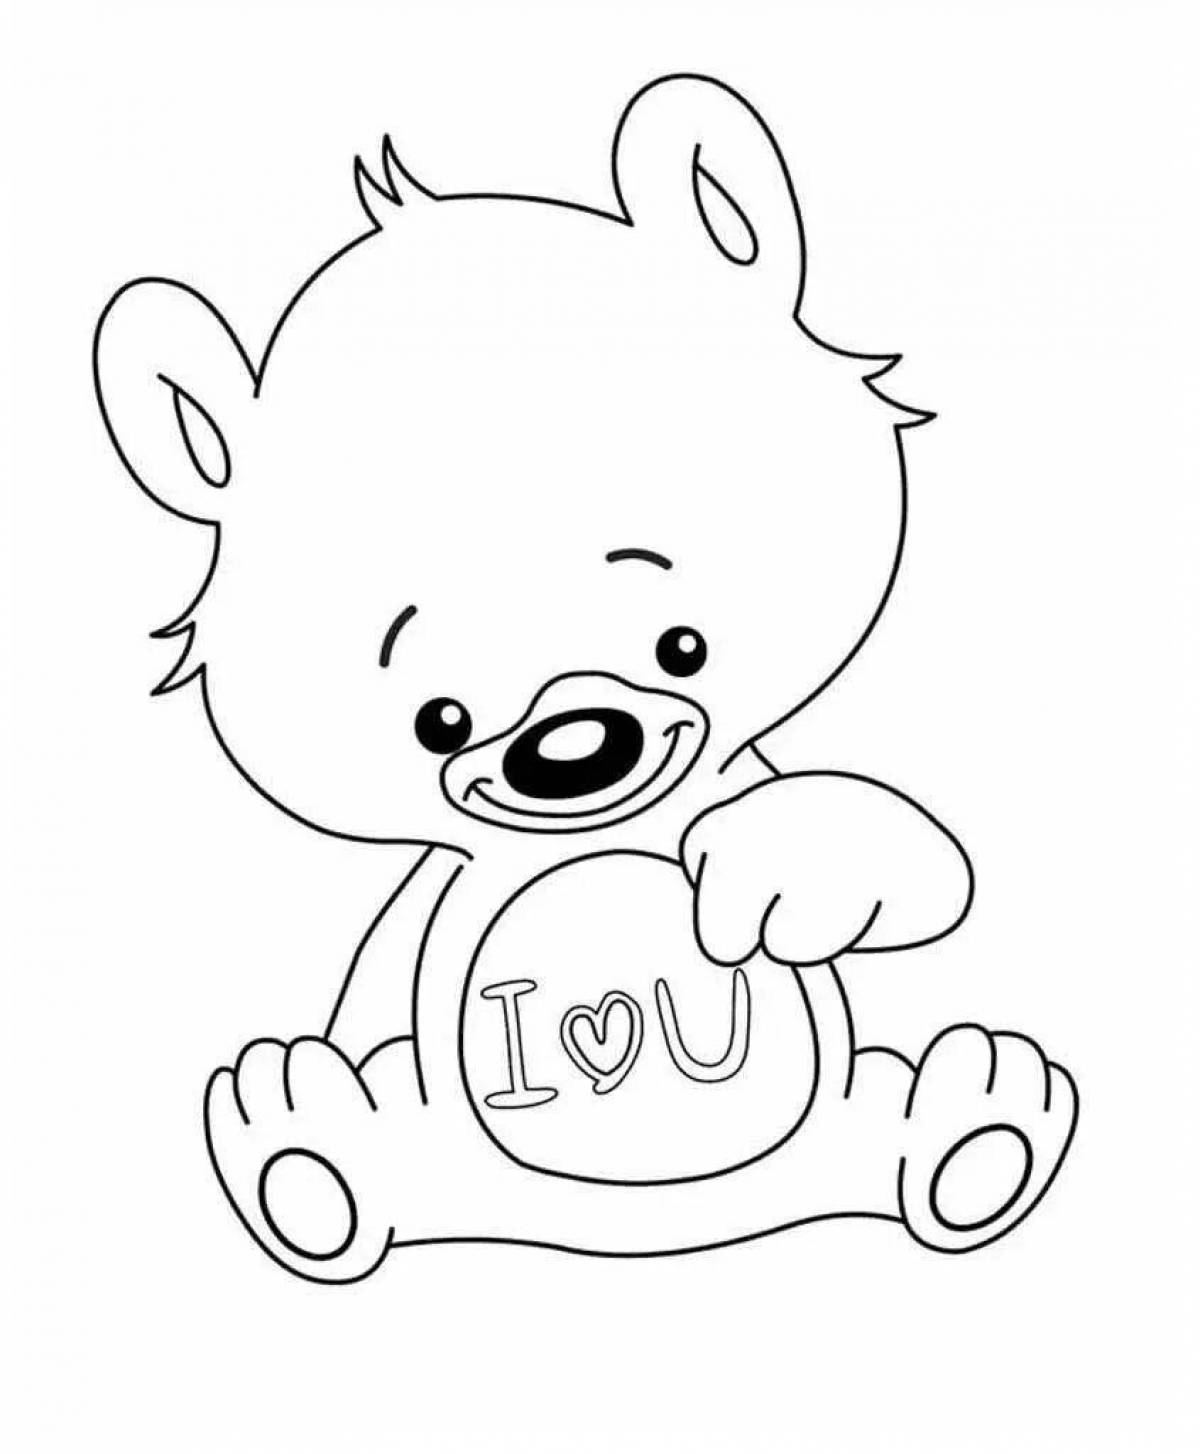 Coloring page dazzling super bear